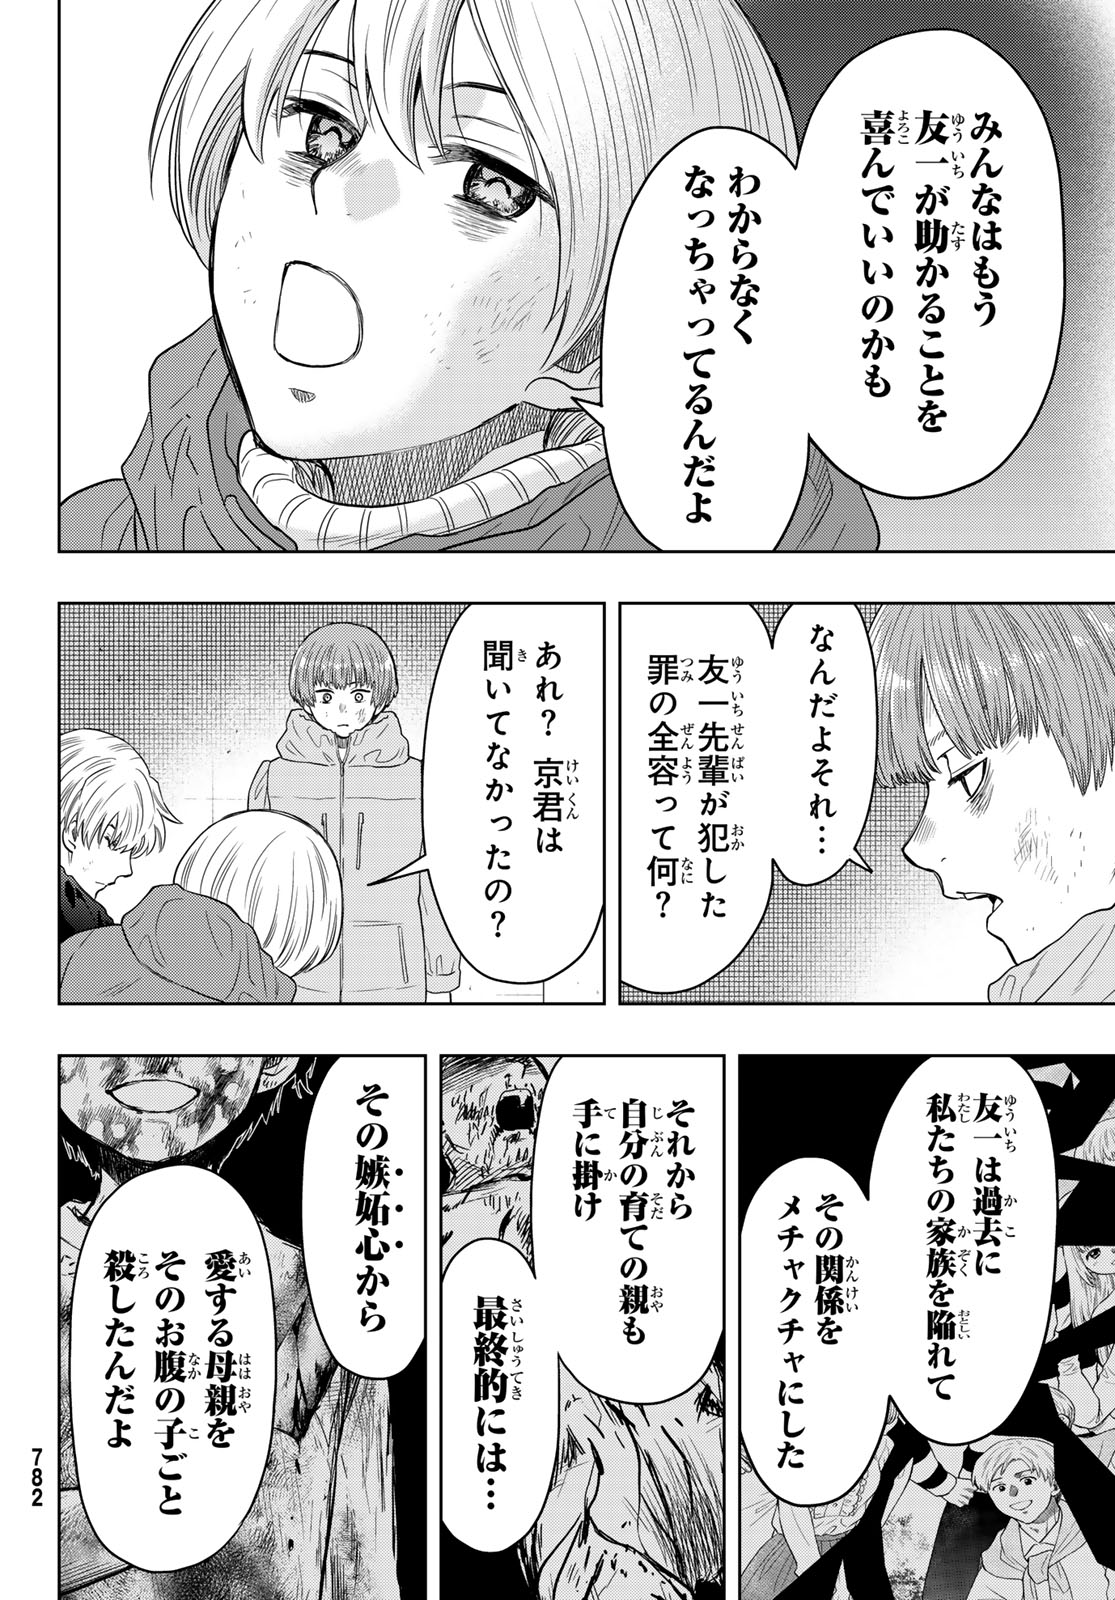 Tomodachi Game (Friends Games) - Chapter 126 - Page 24